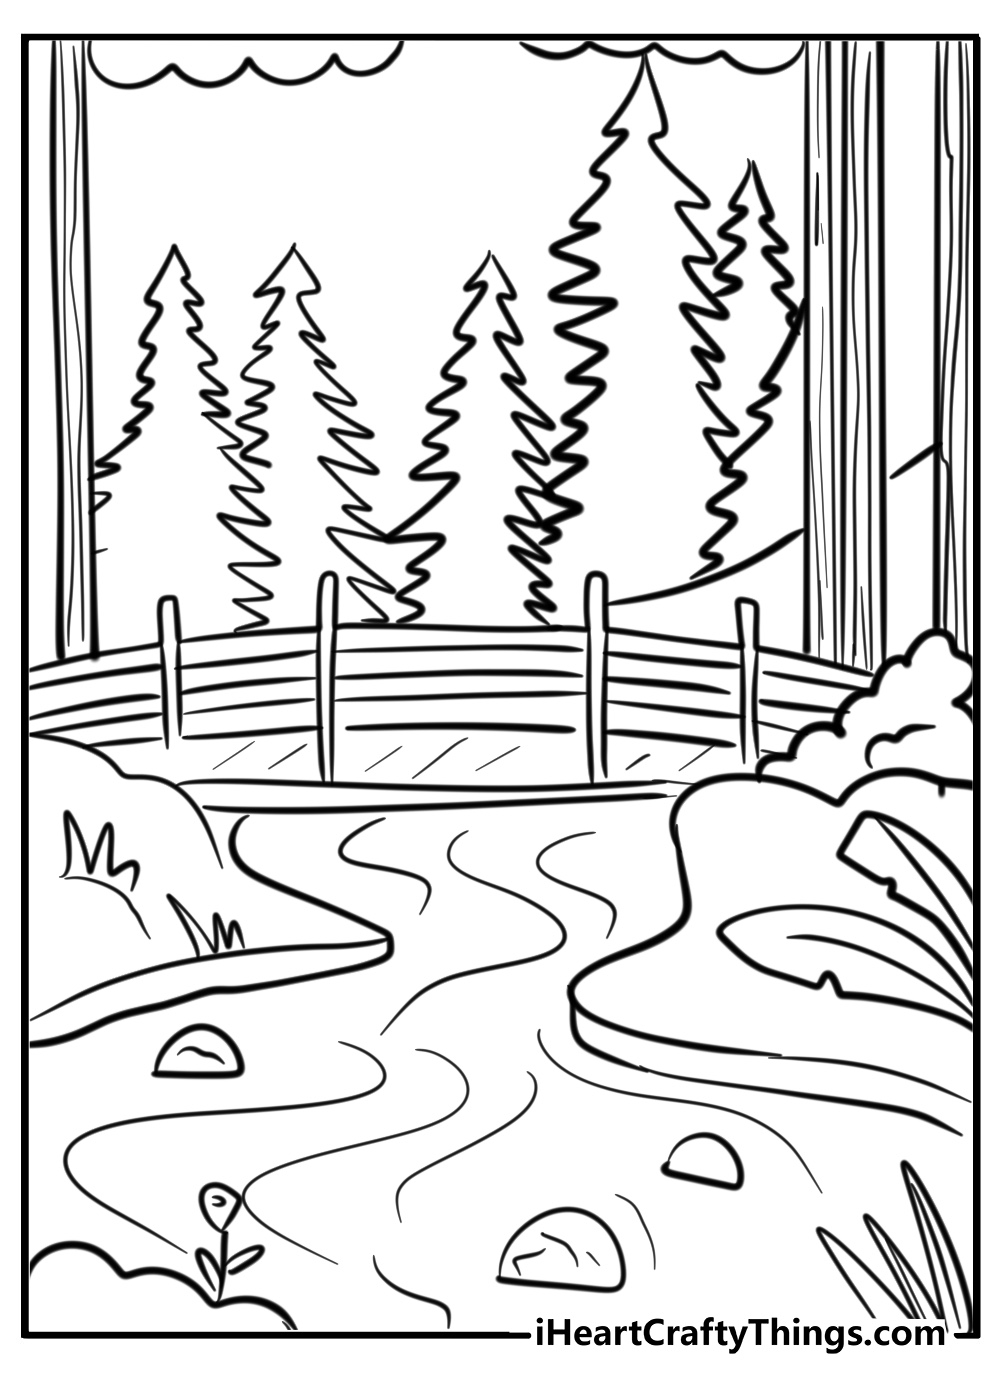 Marker coloring pages for adults